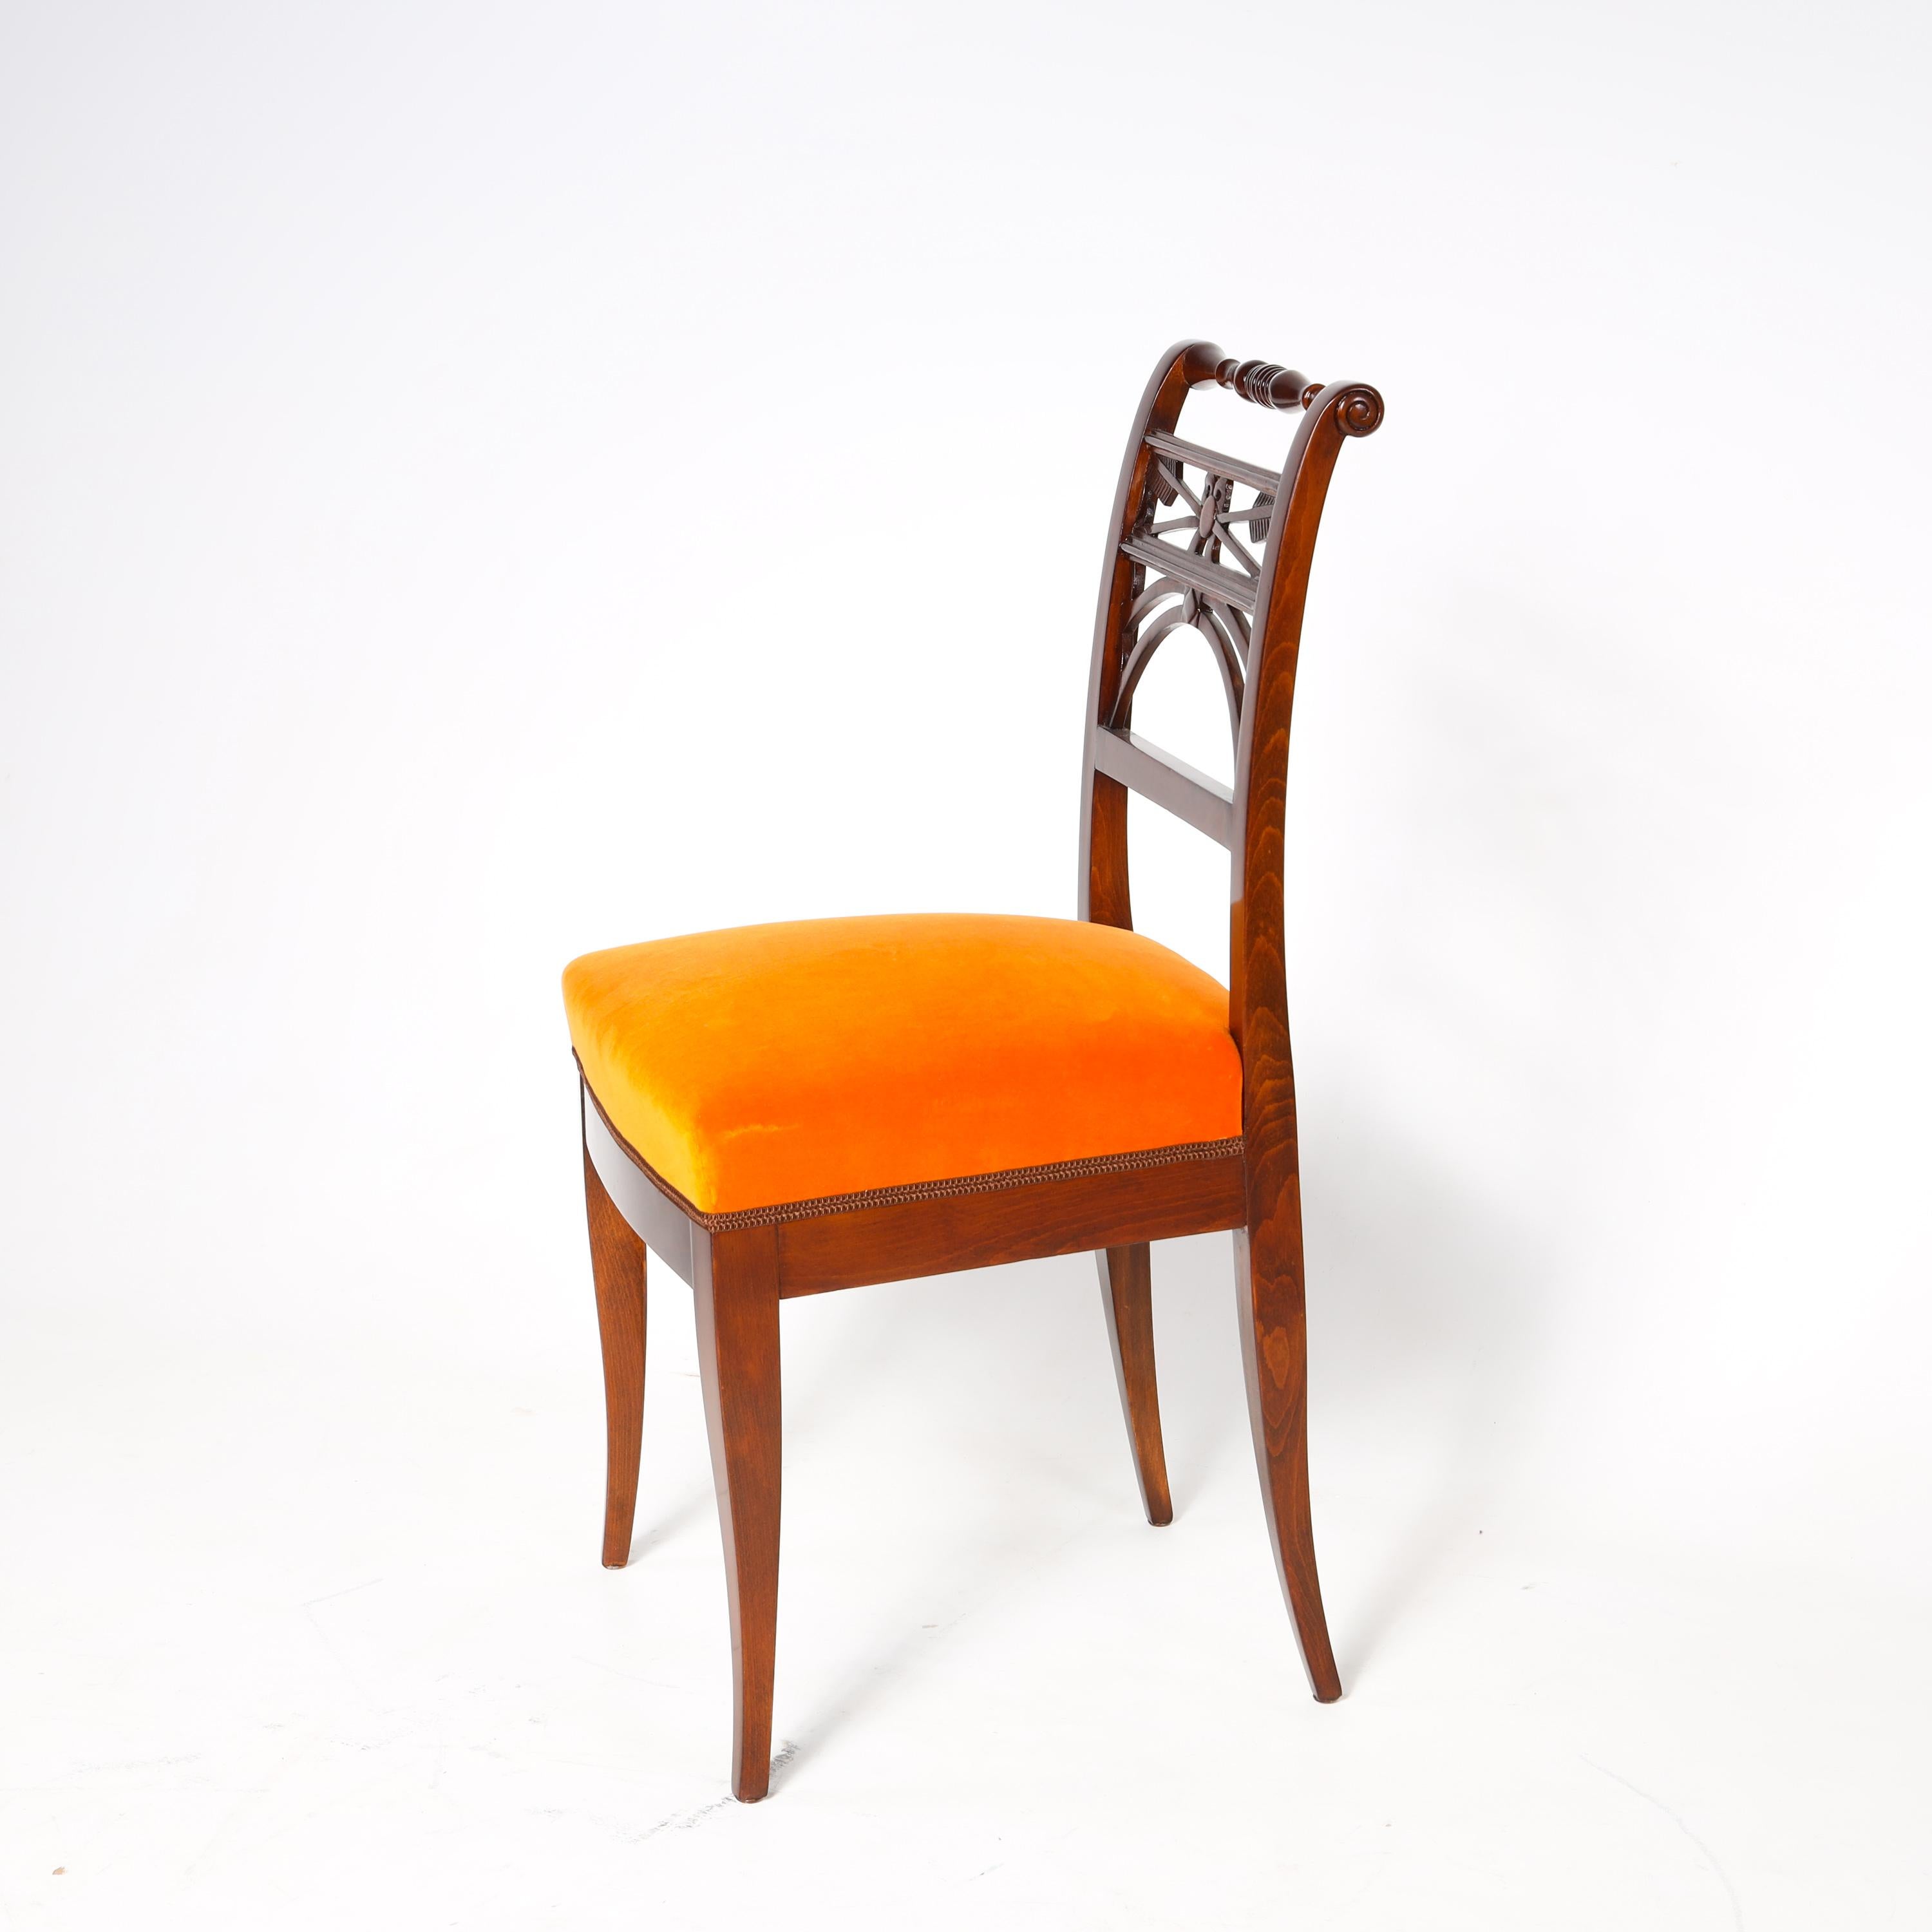 Mahogany Neoclassical Chairs, Early 19th Century